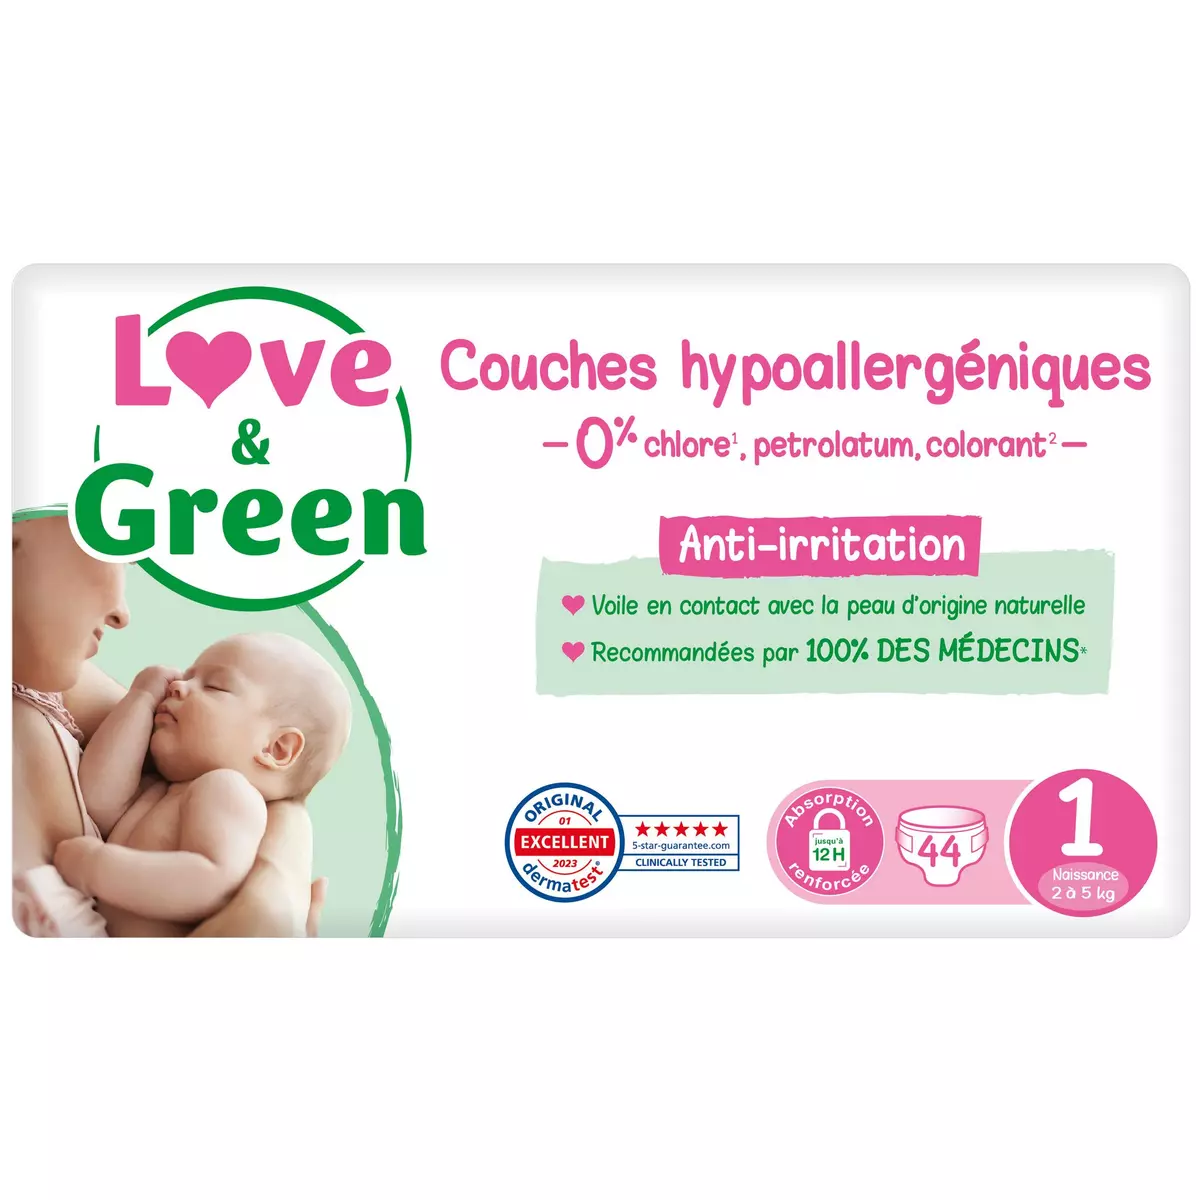 PAMPERS Premium protection couches taille 1 (2-5kg) 44 couches pas cher 